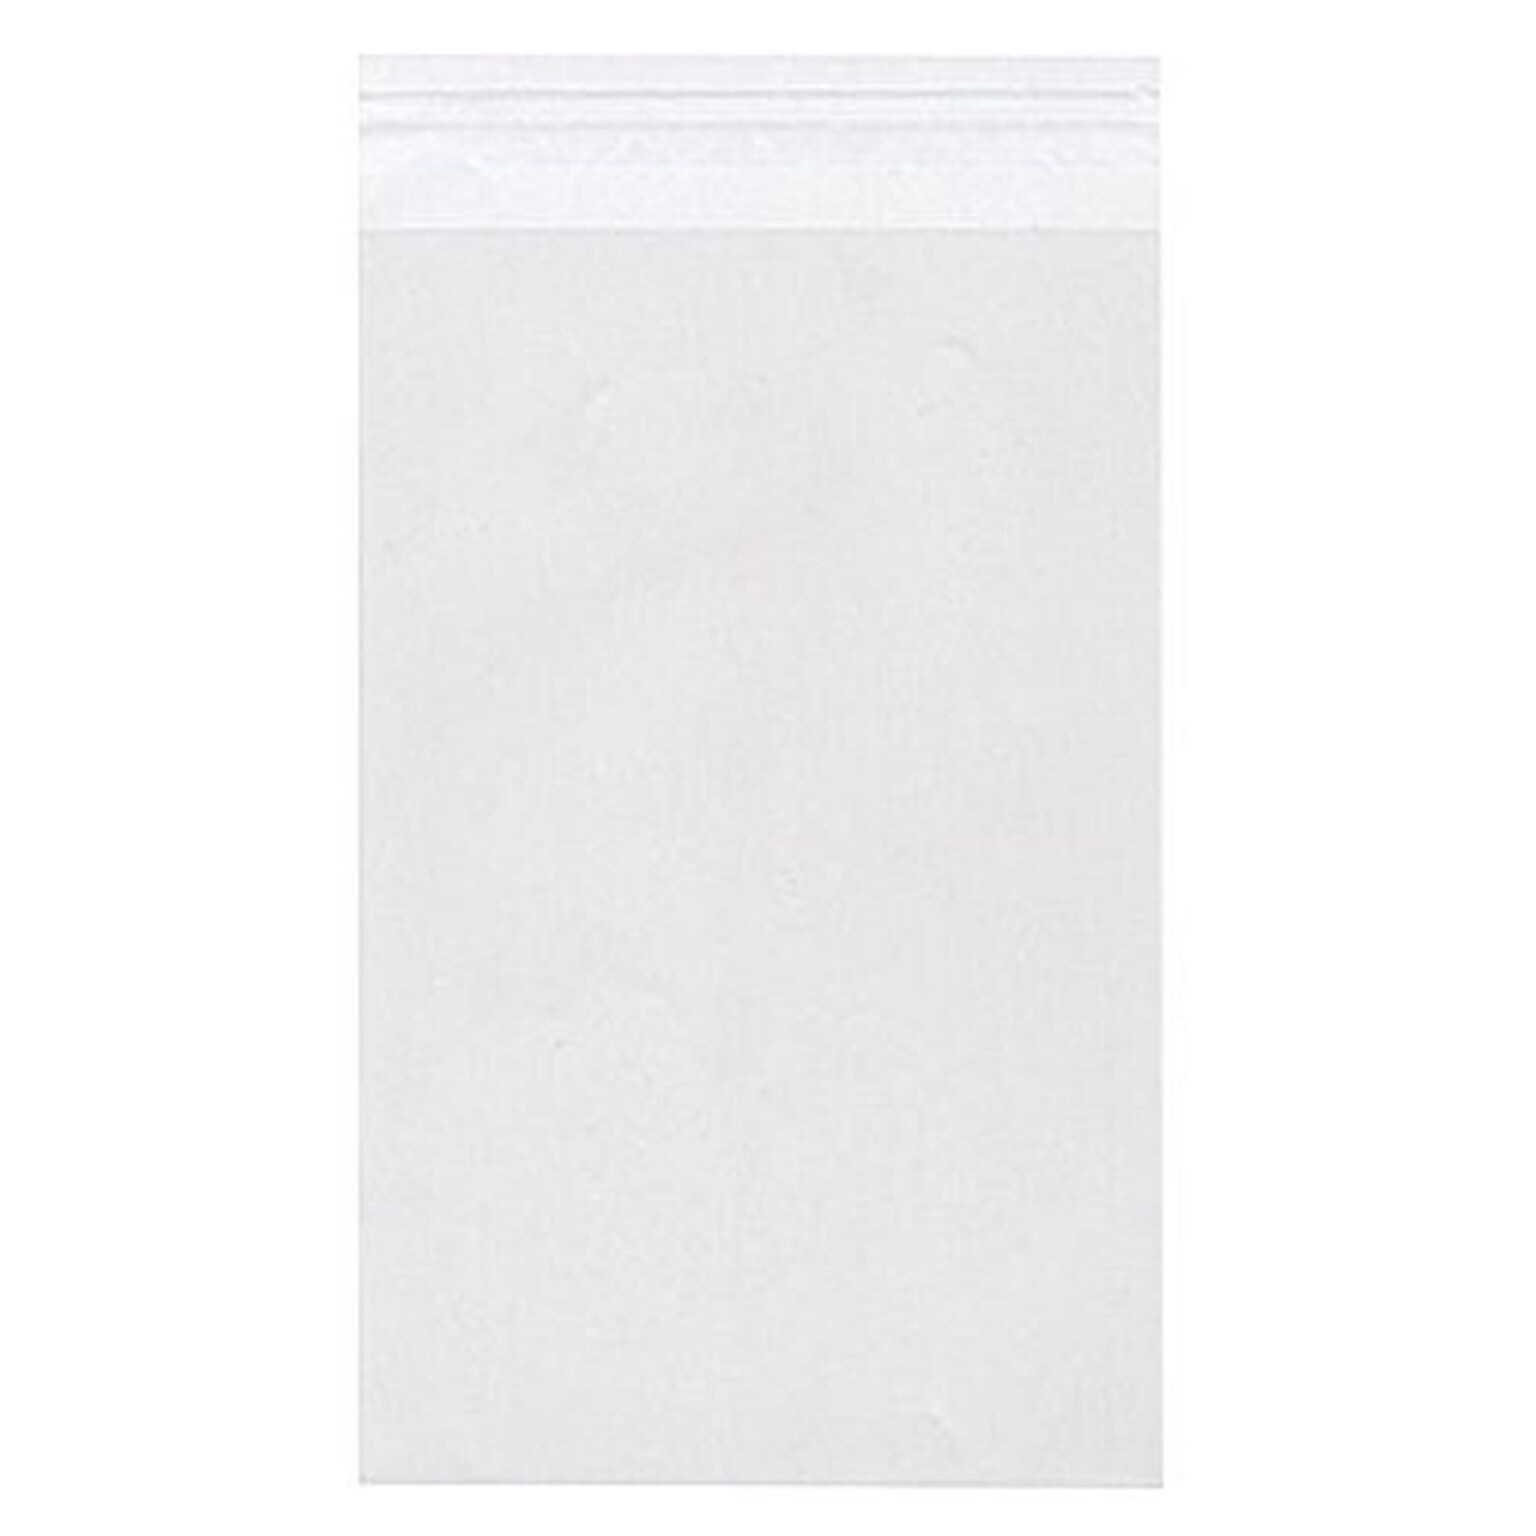 JAM Paper Cello Sleeves with Self-Adhesive Closure, 13.4375 x 19.25, Clear, 1000/Carton (13.519.25CELLOB)